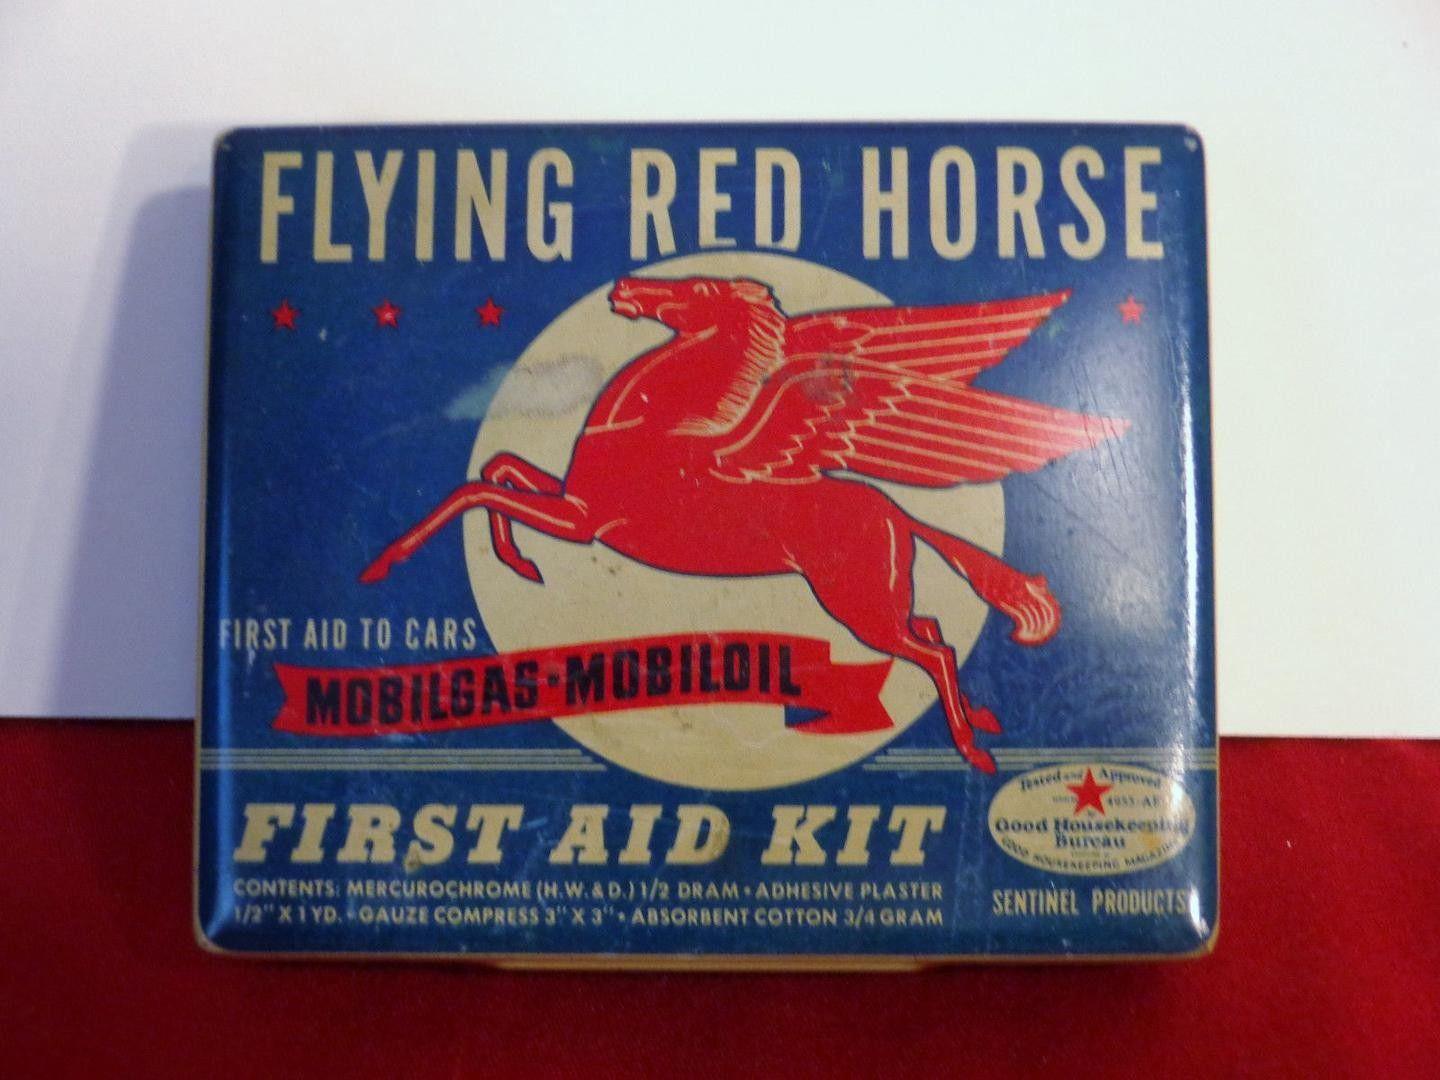 Mobil Flying Red Horse Logo - Flying Red Horse Mobil Oil First Aid Kit w/ Contents Pegasus Gas Tin ...